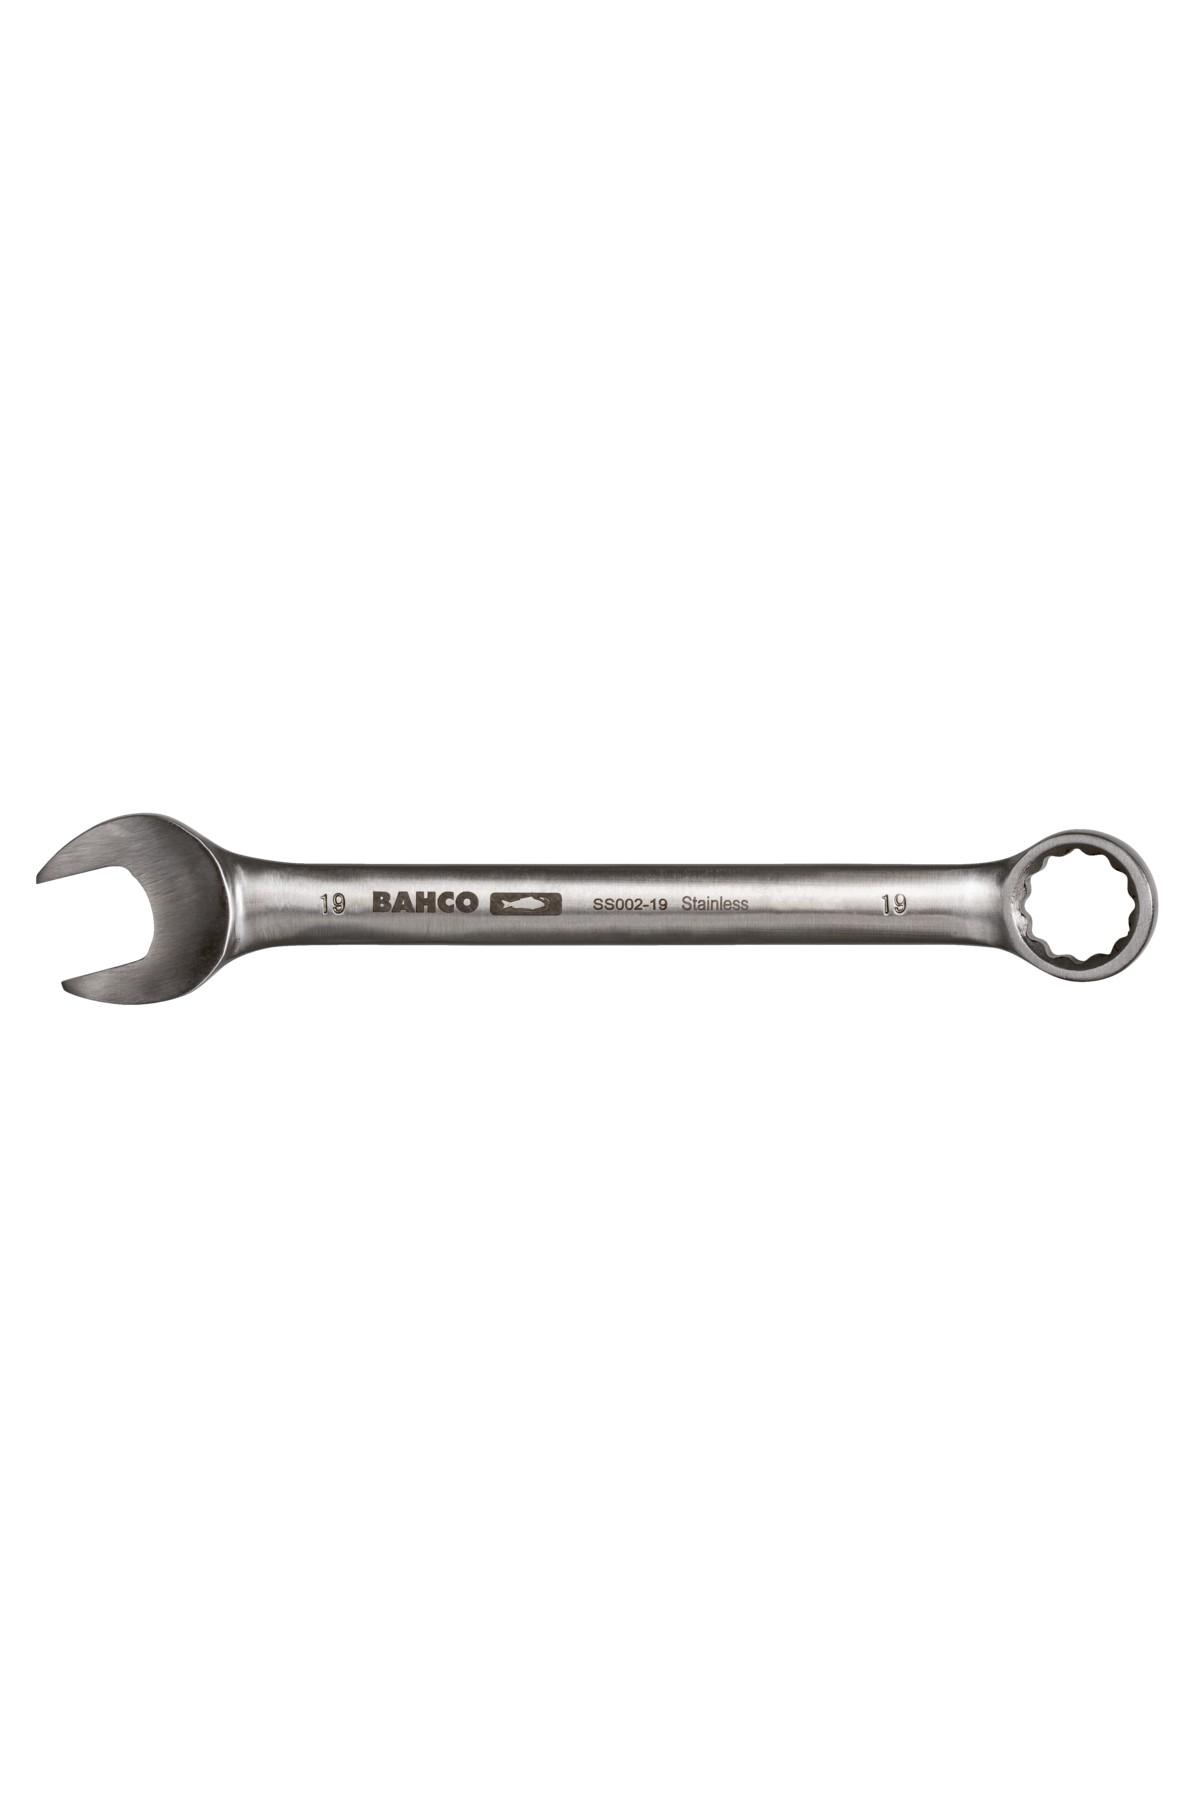 Ring spanner stainless steel SS003 3/8